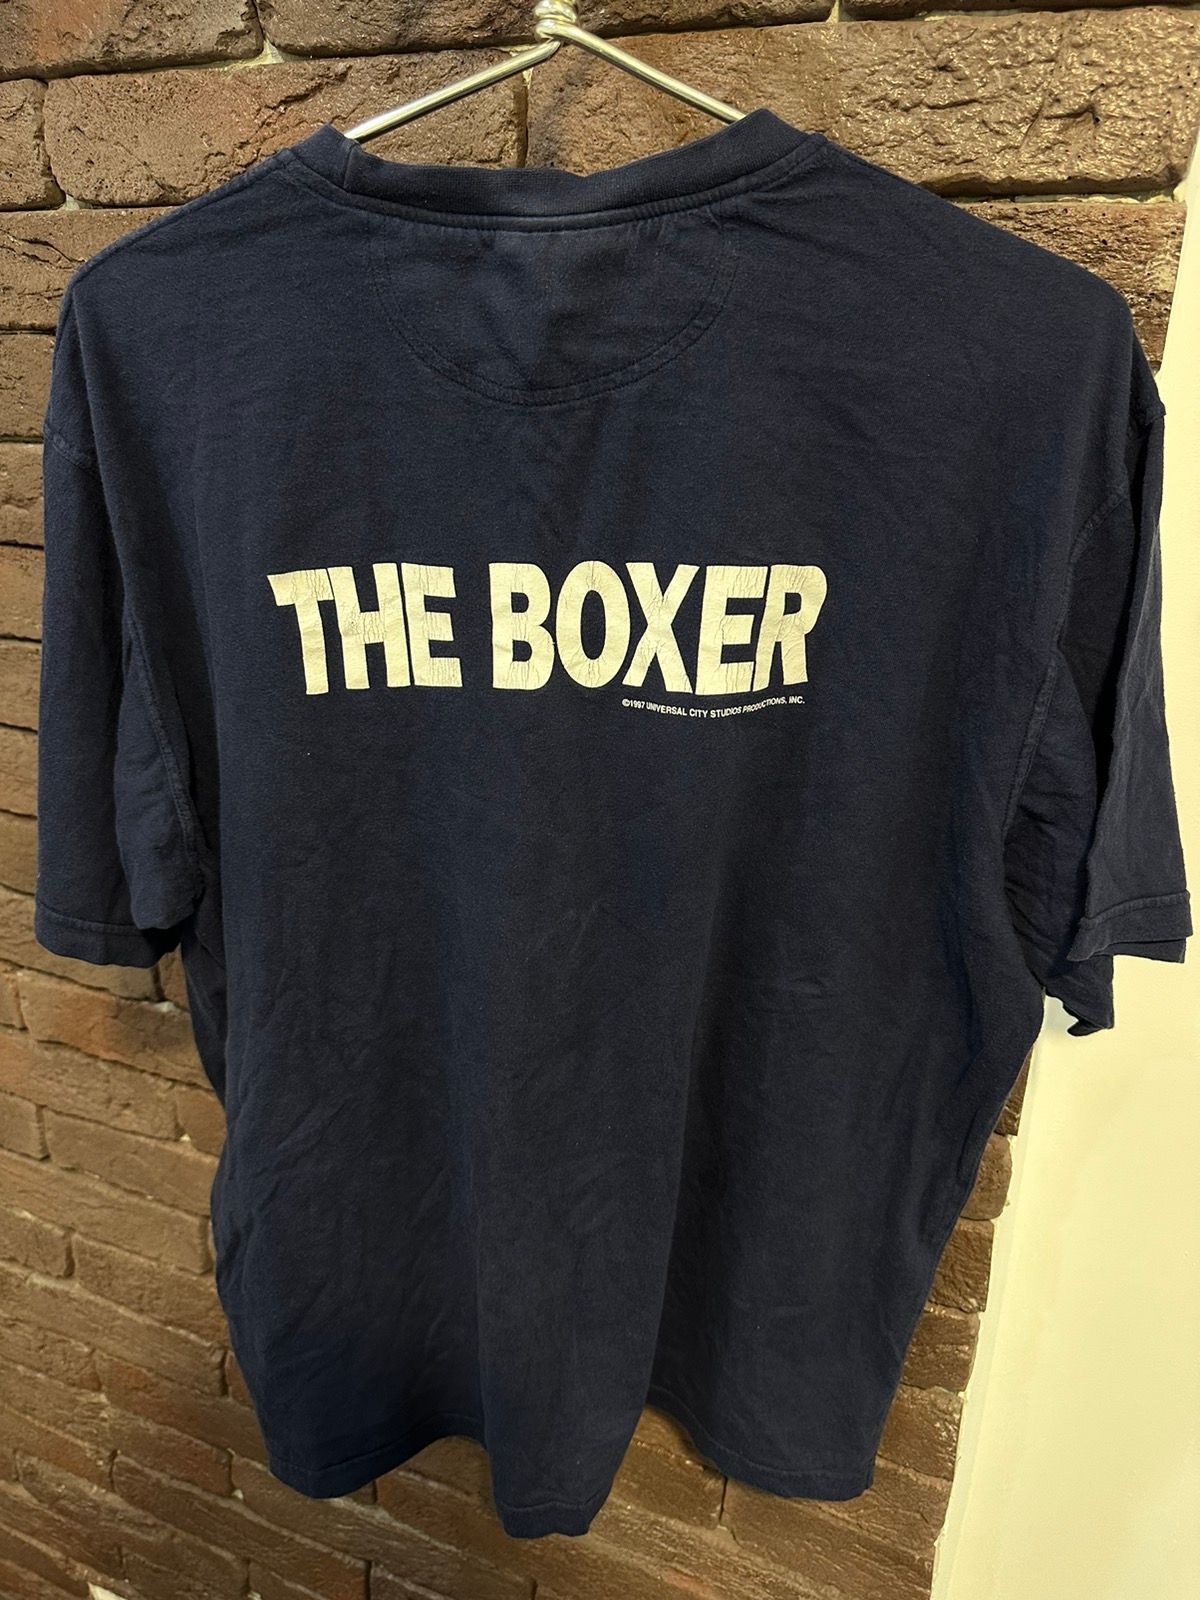 Pre-owned Adidas X Genuine Merchandise By True Fan Vintage Adidas The Boxer 1997 T Shirt Merchandise Cinema 90's In Blue